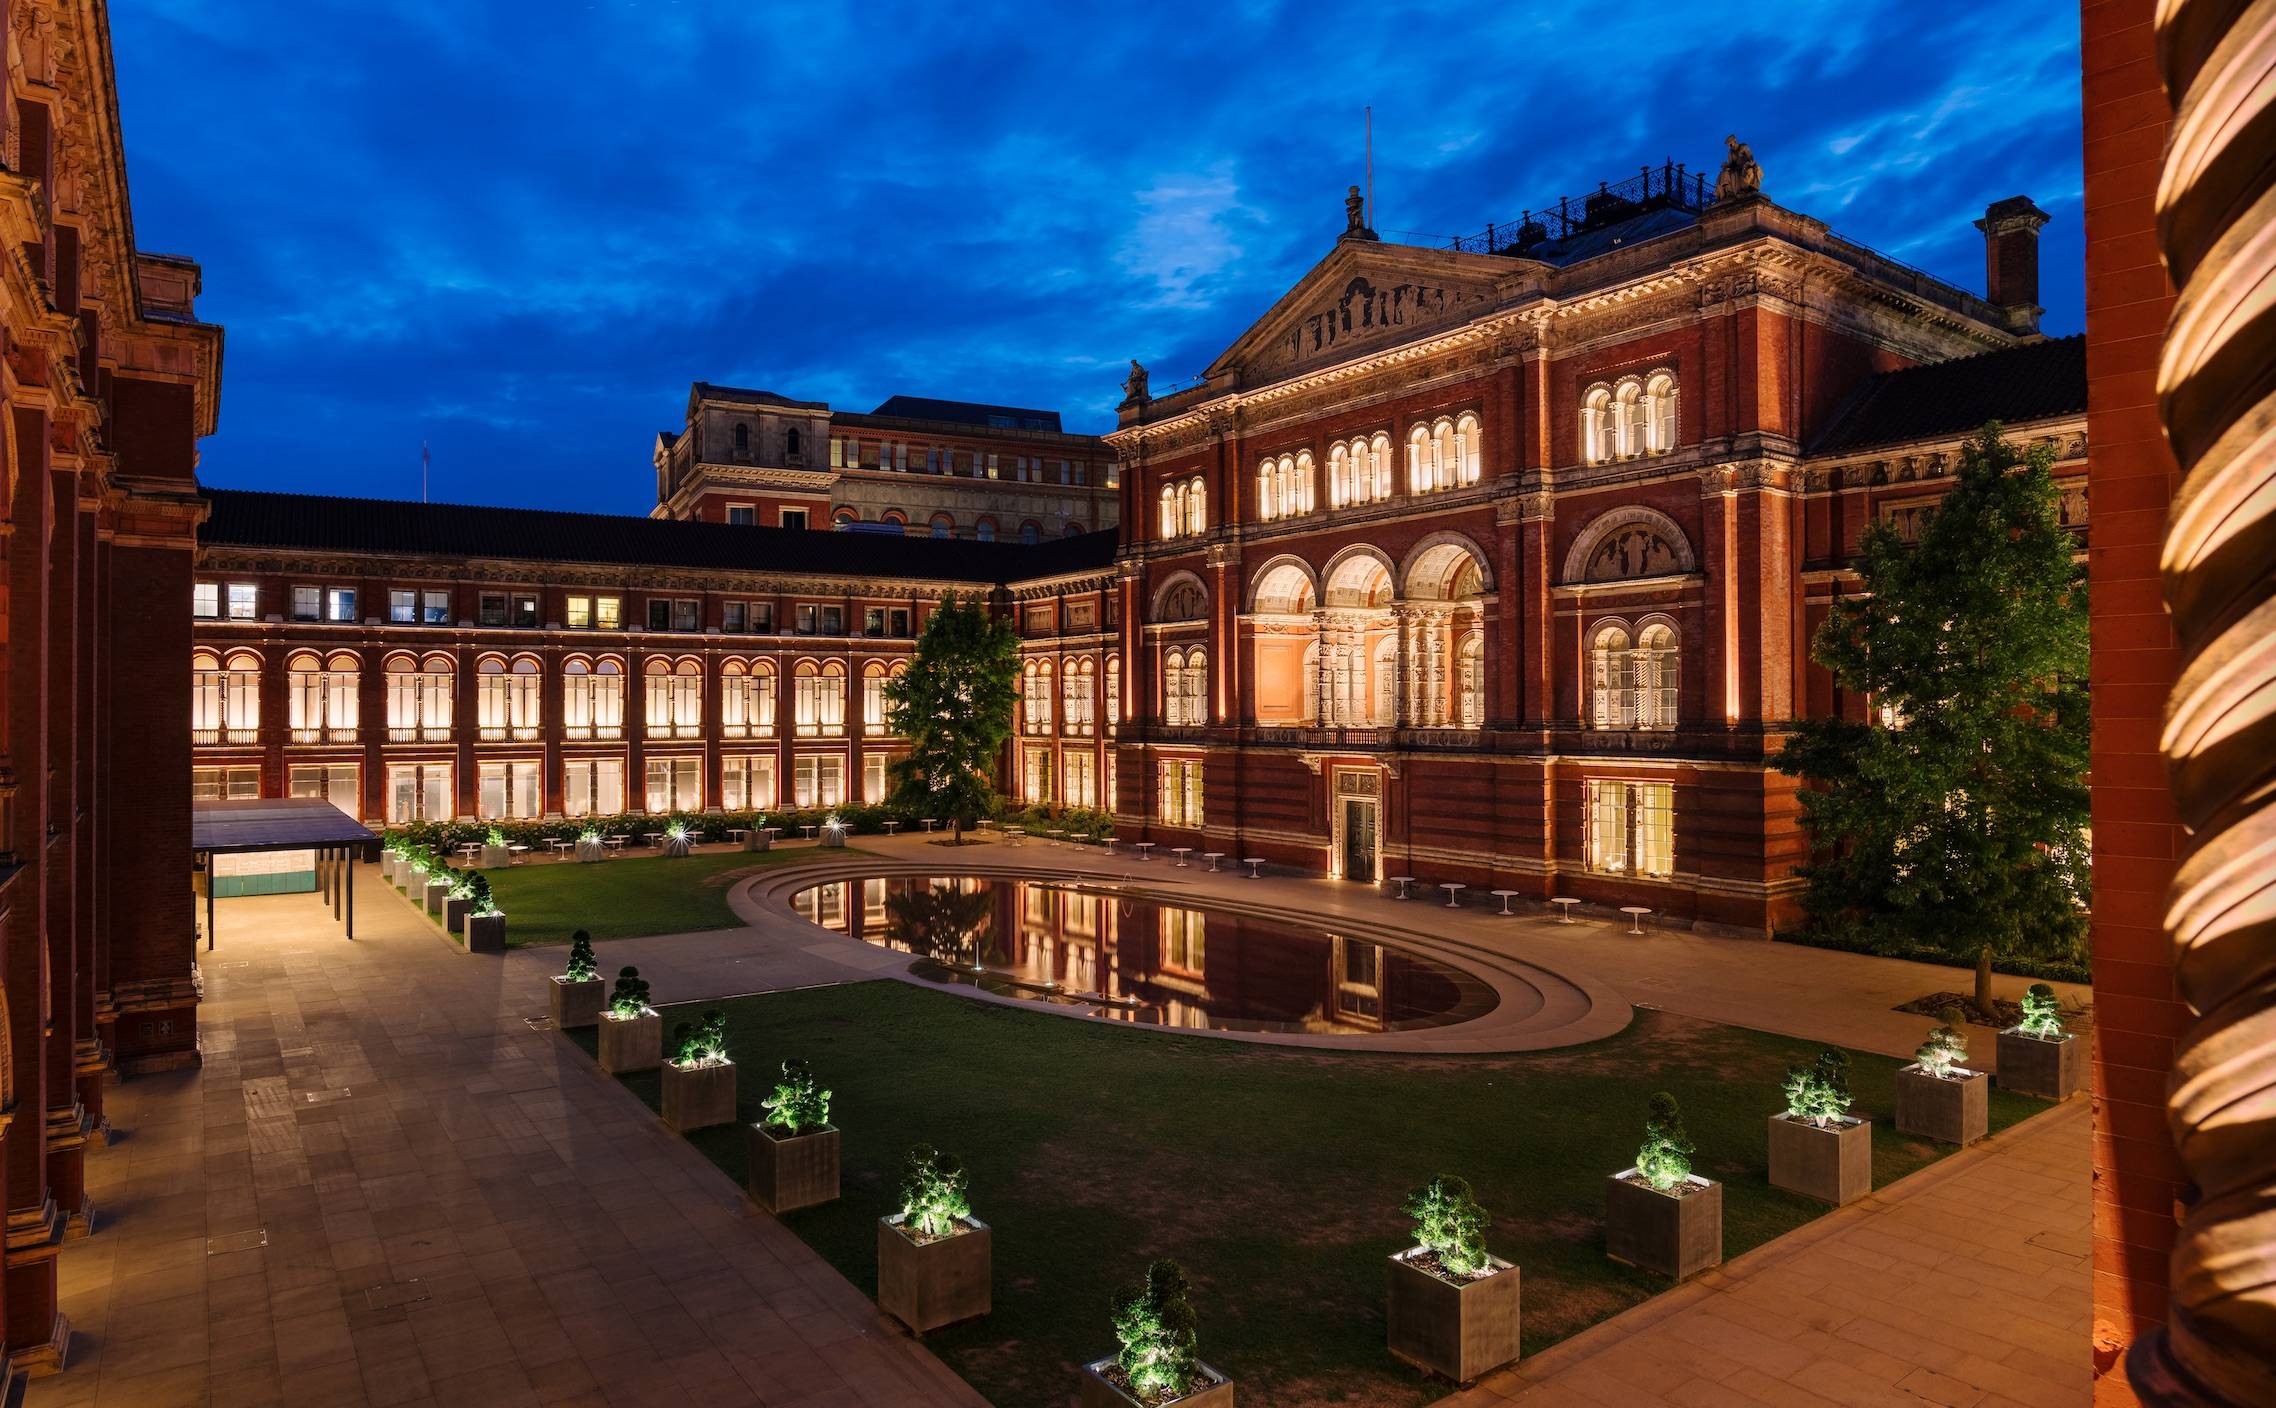 London event planner, summer party venue, Courtyard at the V&A, Victoria and Albert museum weddings, weddings at the V&A